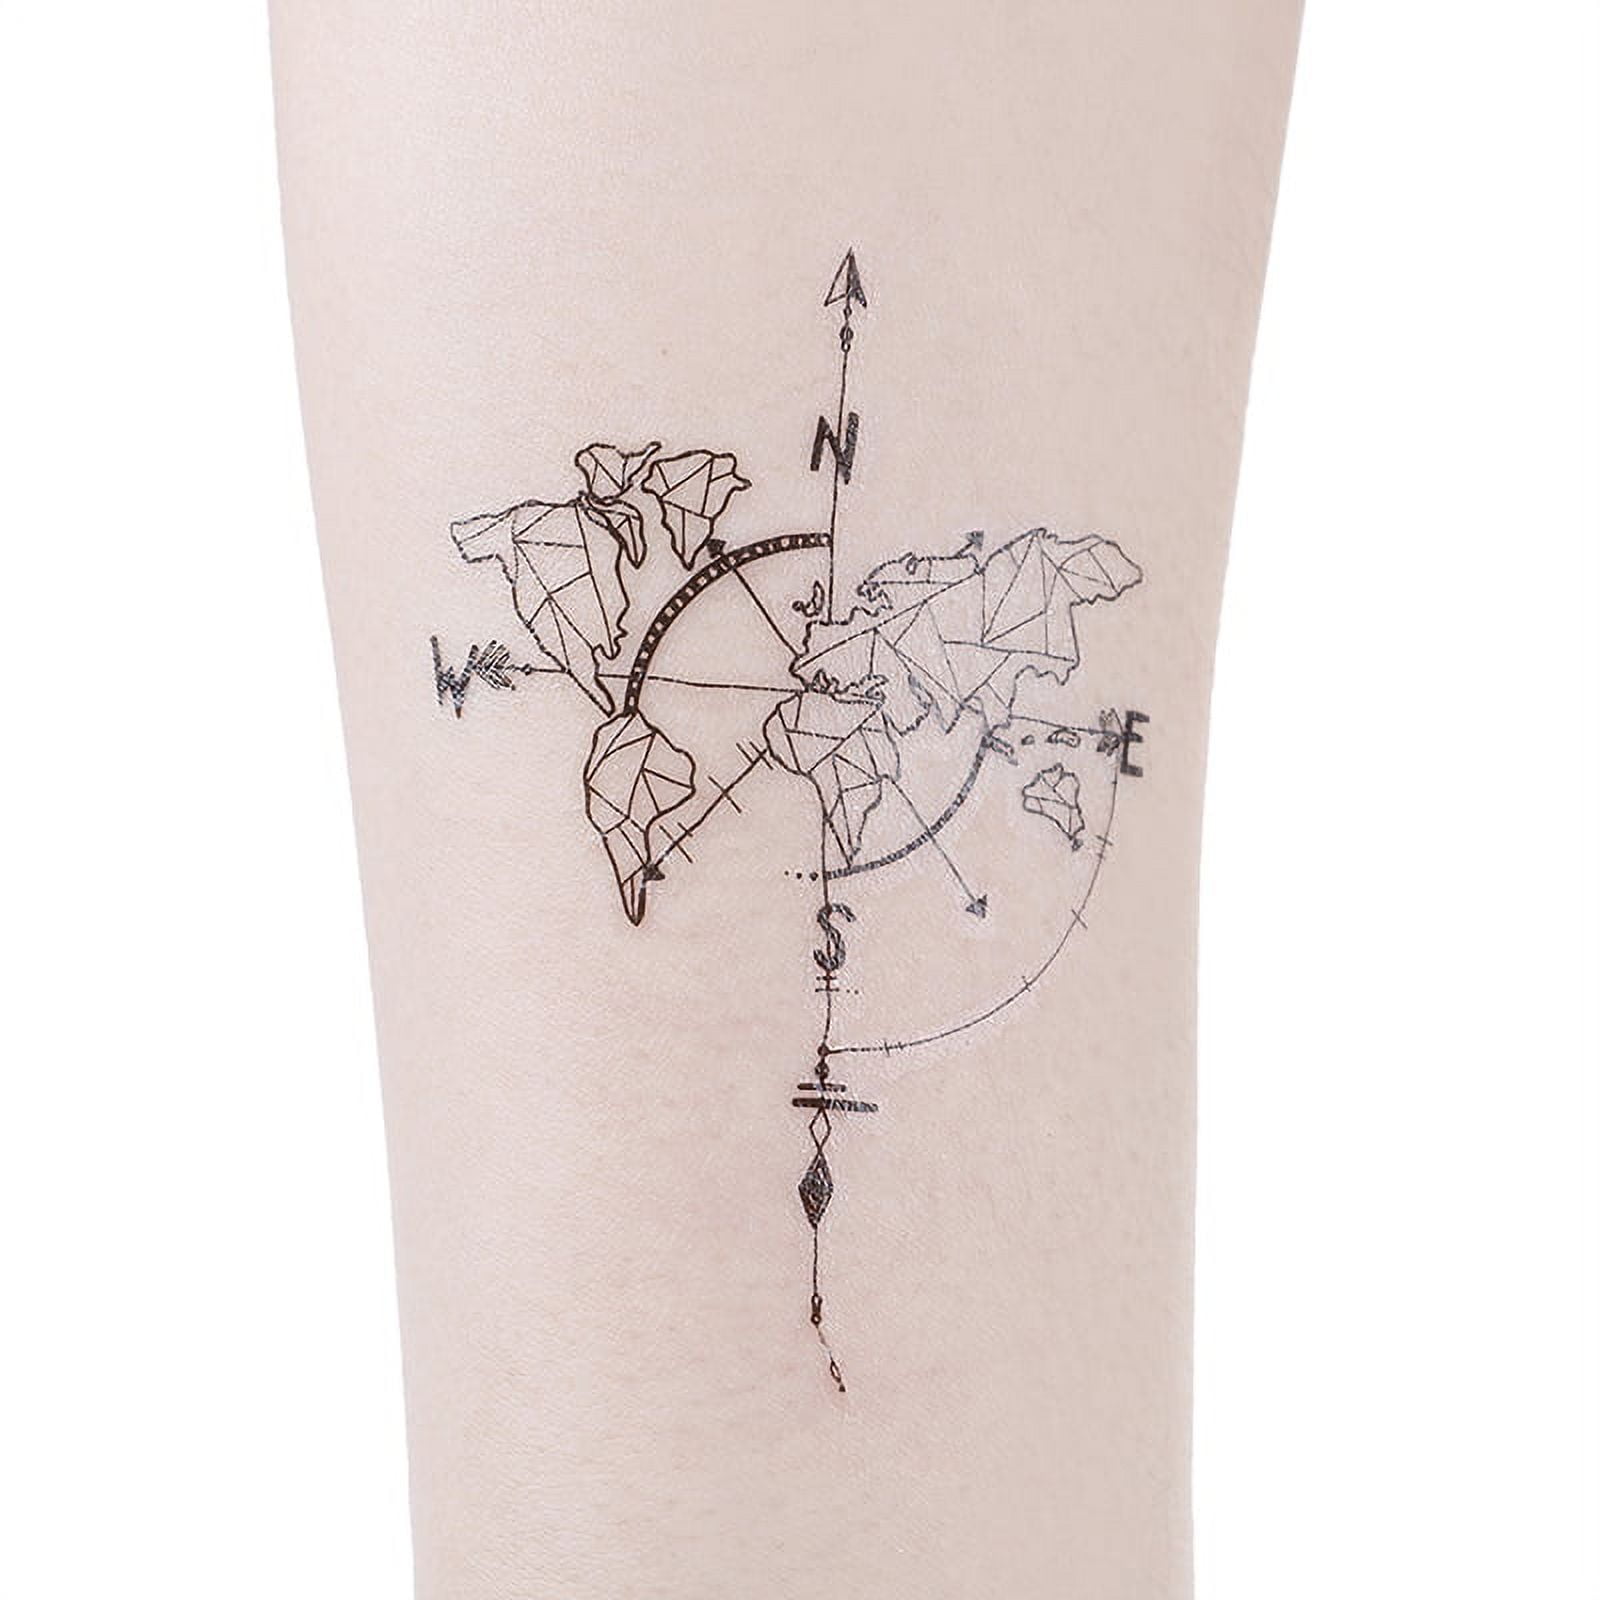 back-tattoo-west-north-east-south-mountain-moon-tree-skull-simple-compass- tattoo | Compass tattoo, Simple compass tattoo, Compass tattoo design